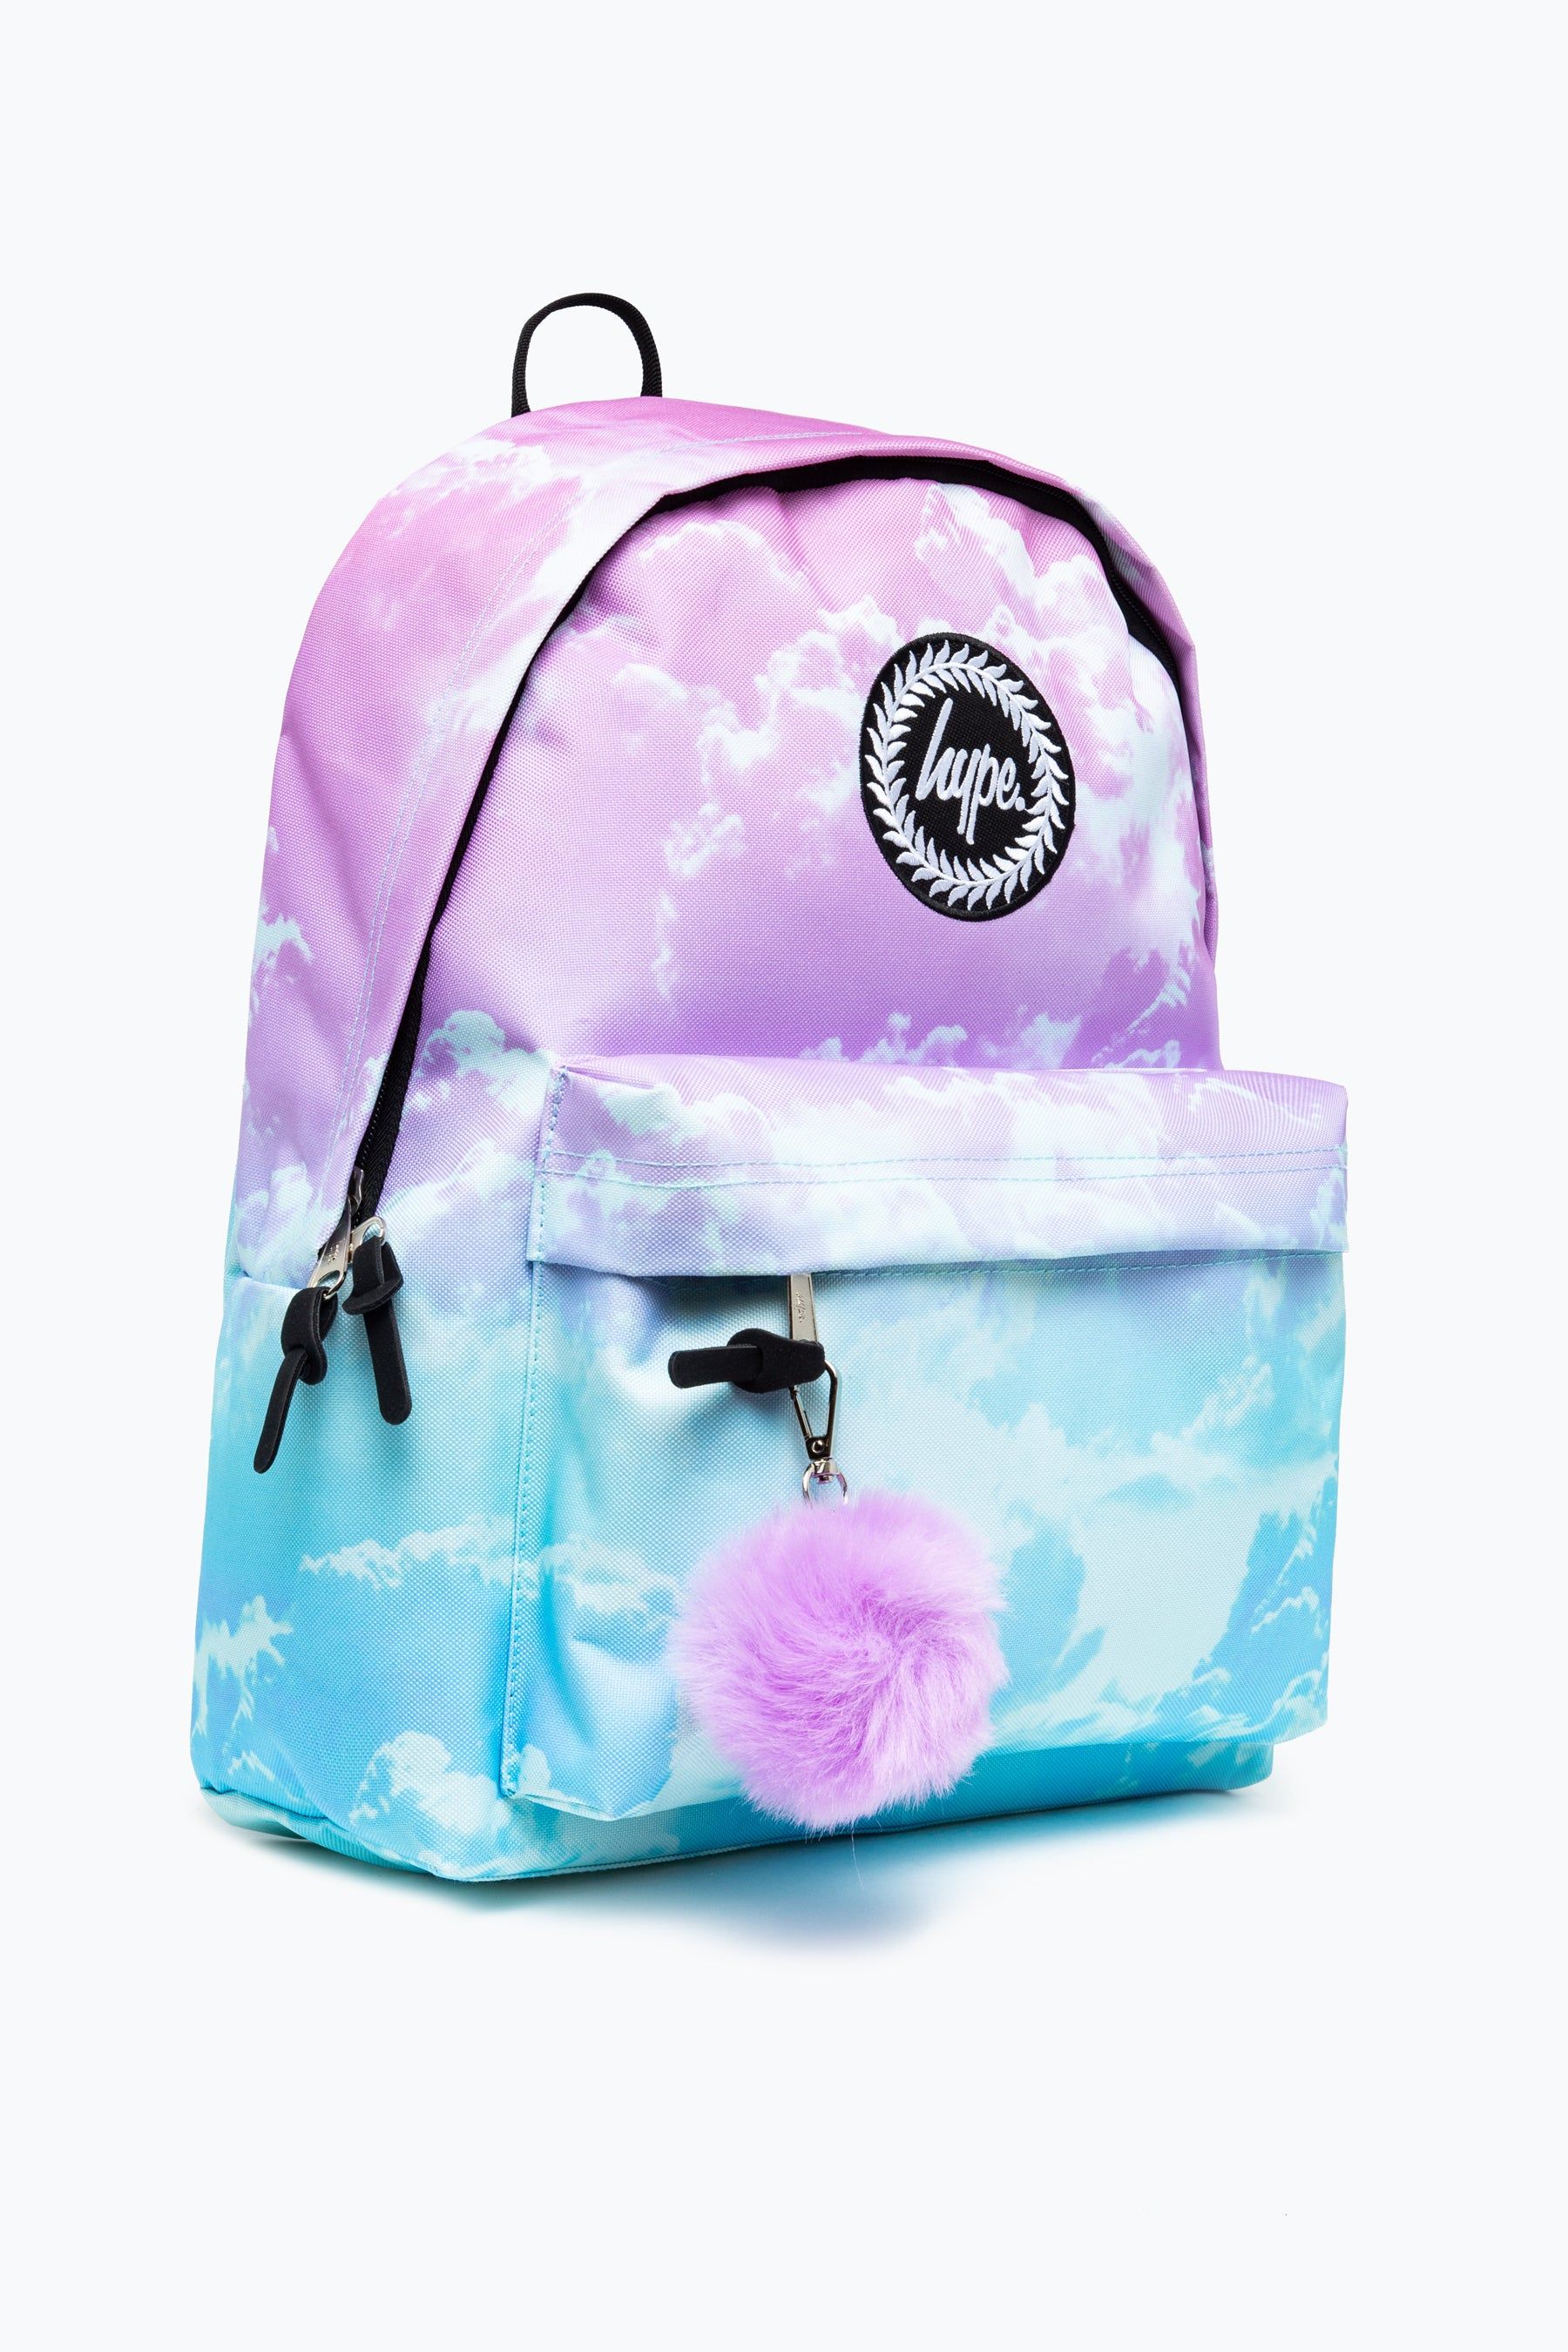 Living life on Cloud 9. The HYPE. Lilac Cloud Backpack is the ultimate summer accessory. Designed with a trending all-over cloud print combined with our signature gradient effect in a pastel pink and baby blue colour palette. Measuring at 42cms x 30cms x 12cms, finished with a front mini pocket, grab handle, embossed zips and inside branded lining. Finished with the iconic HYPE. crest badge in monochrome embroidered on the front. The straps offer supreme comfort with just the right amount of padding. Wipe clean only.